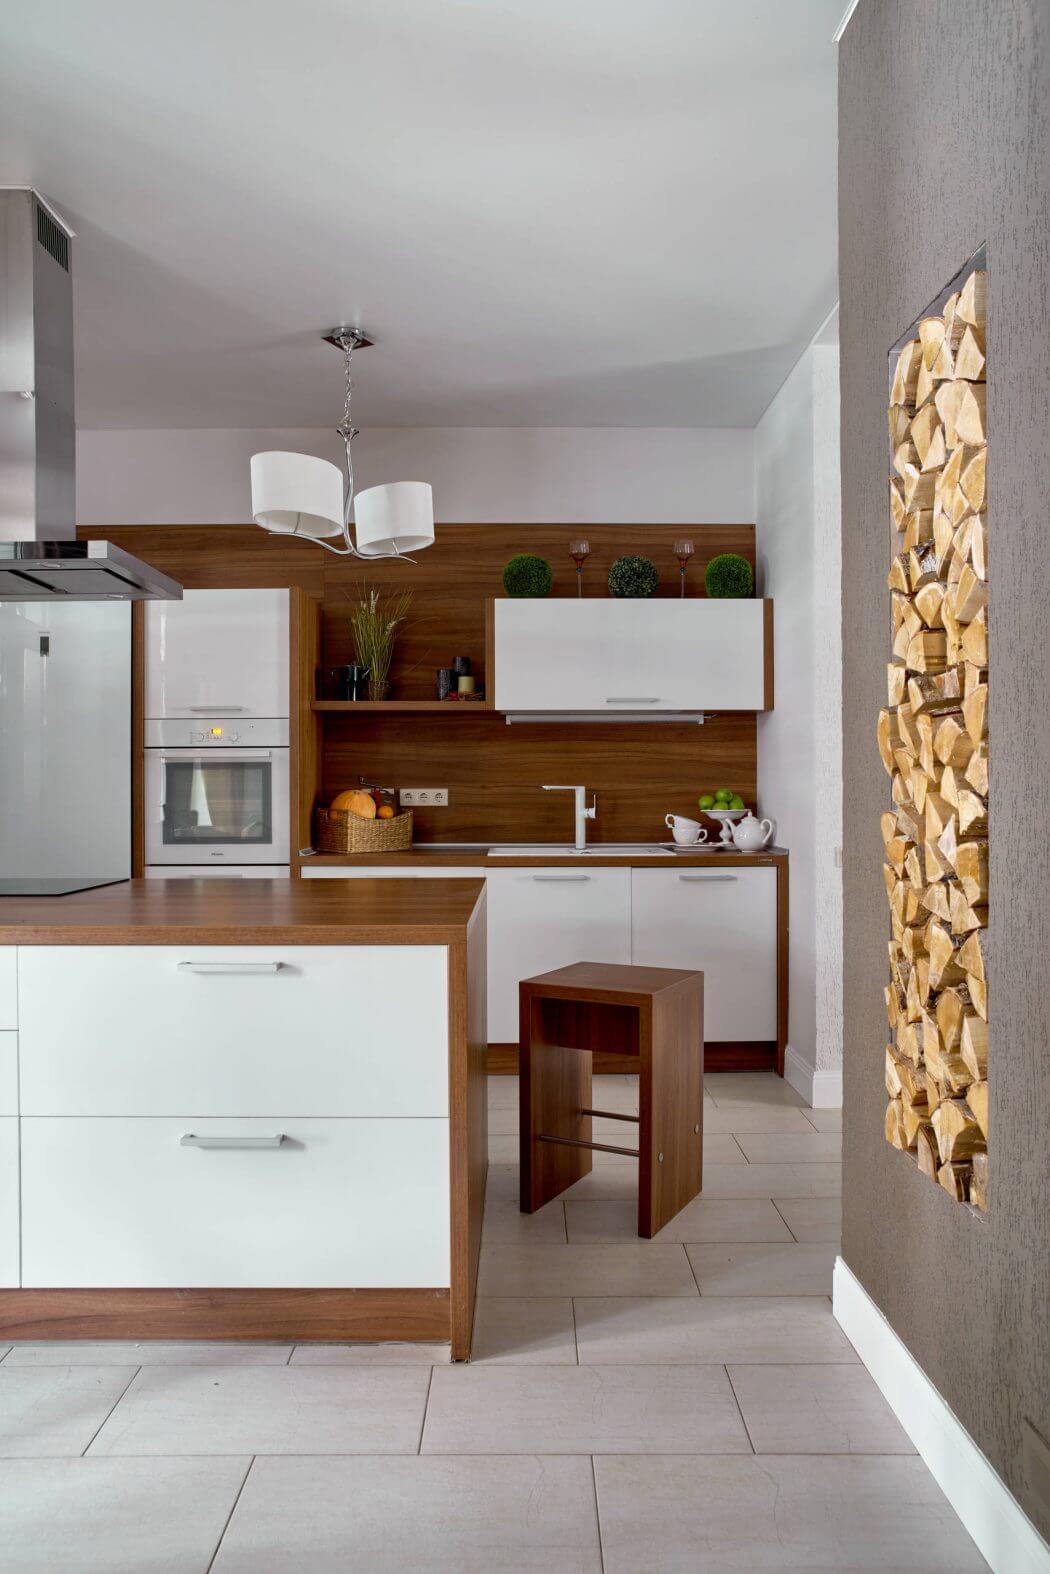 Sleek modern kitchen with wooden cabinetry, pendant lights, and a stack of firewood.